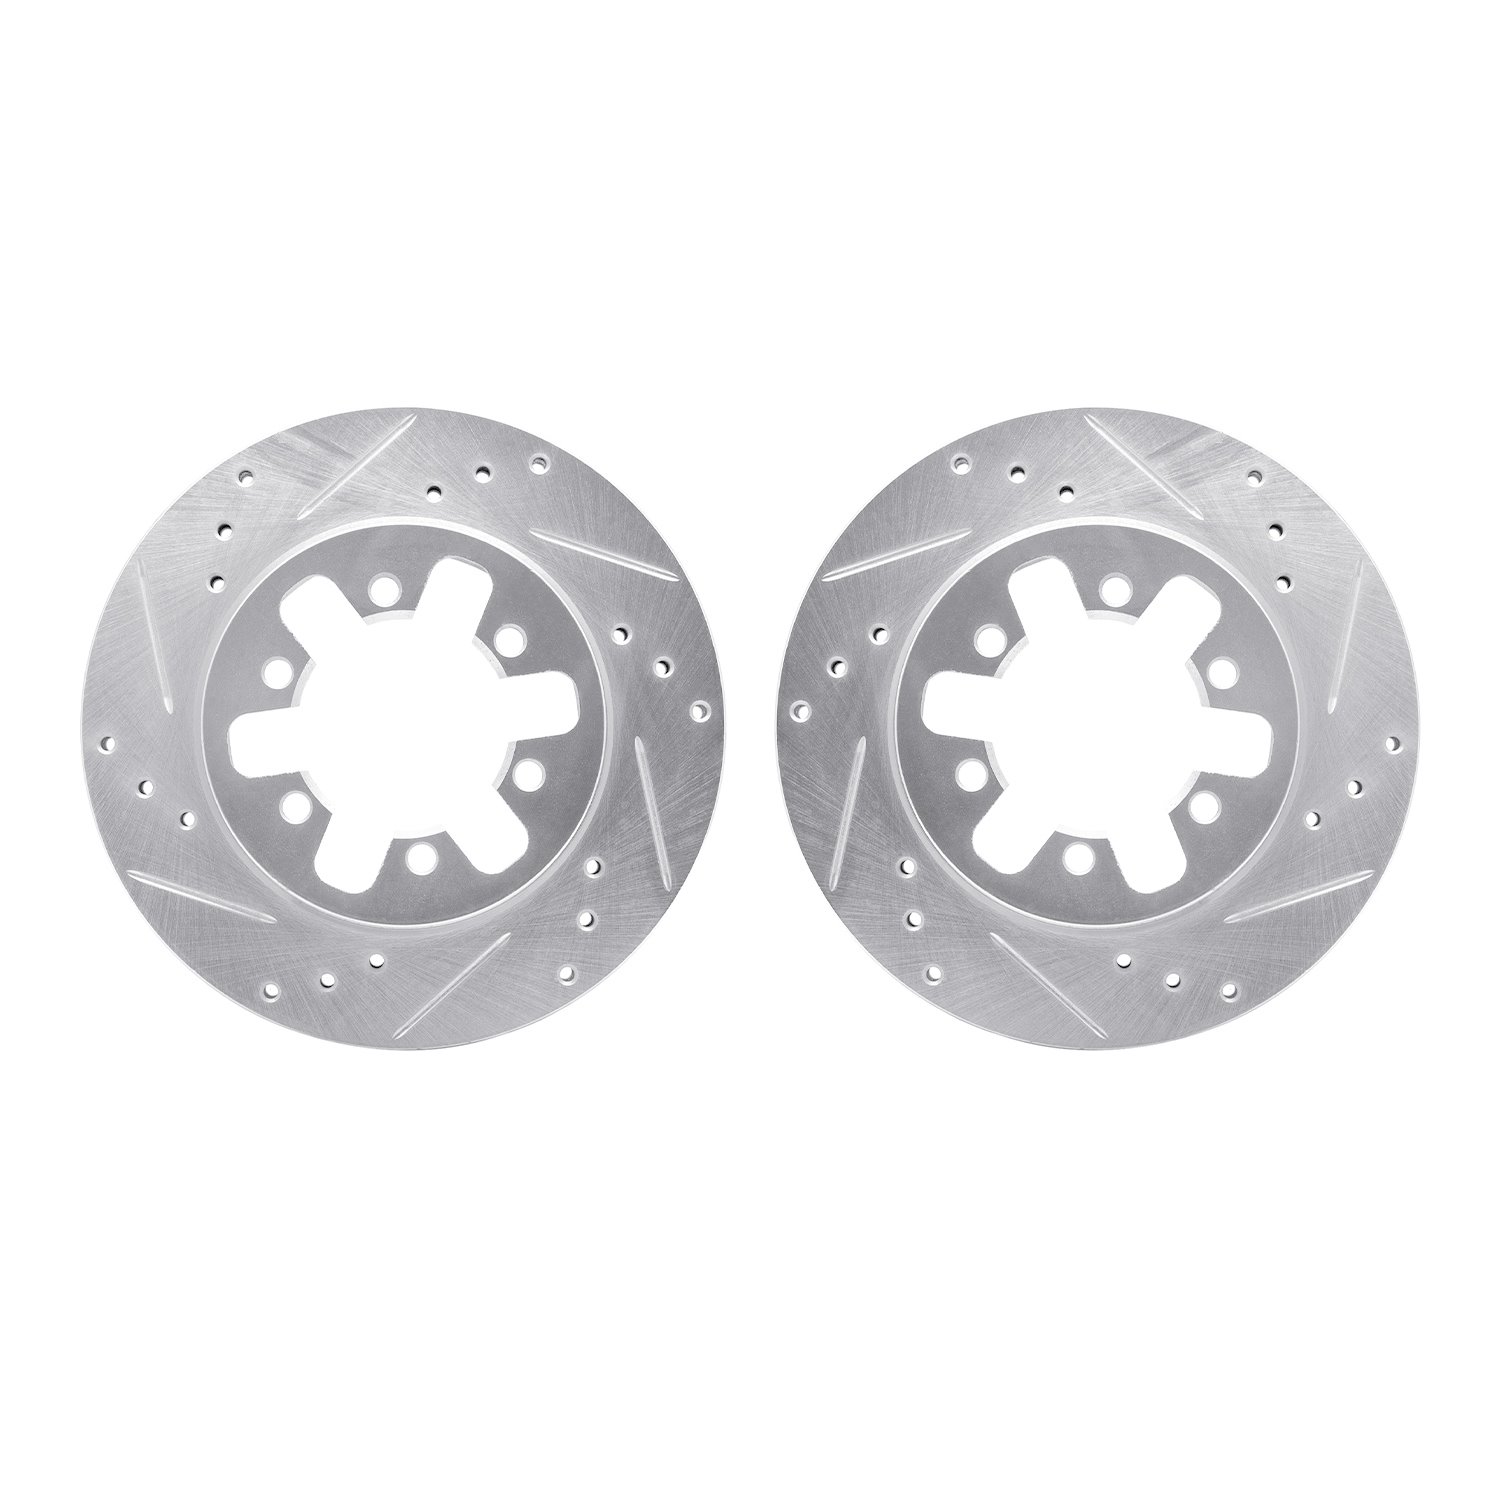 Drilled/Slotted Brake Rotors [Silver], 1985-1997 Infiniti/Nissan